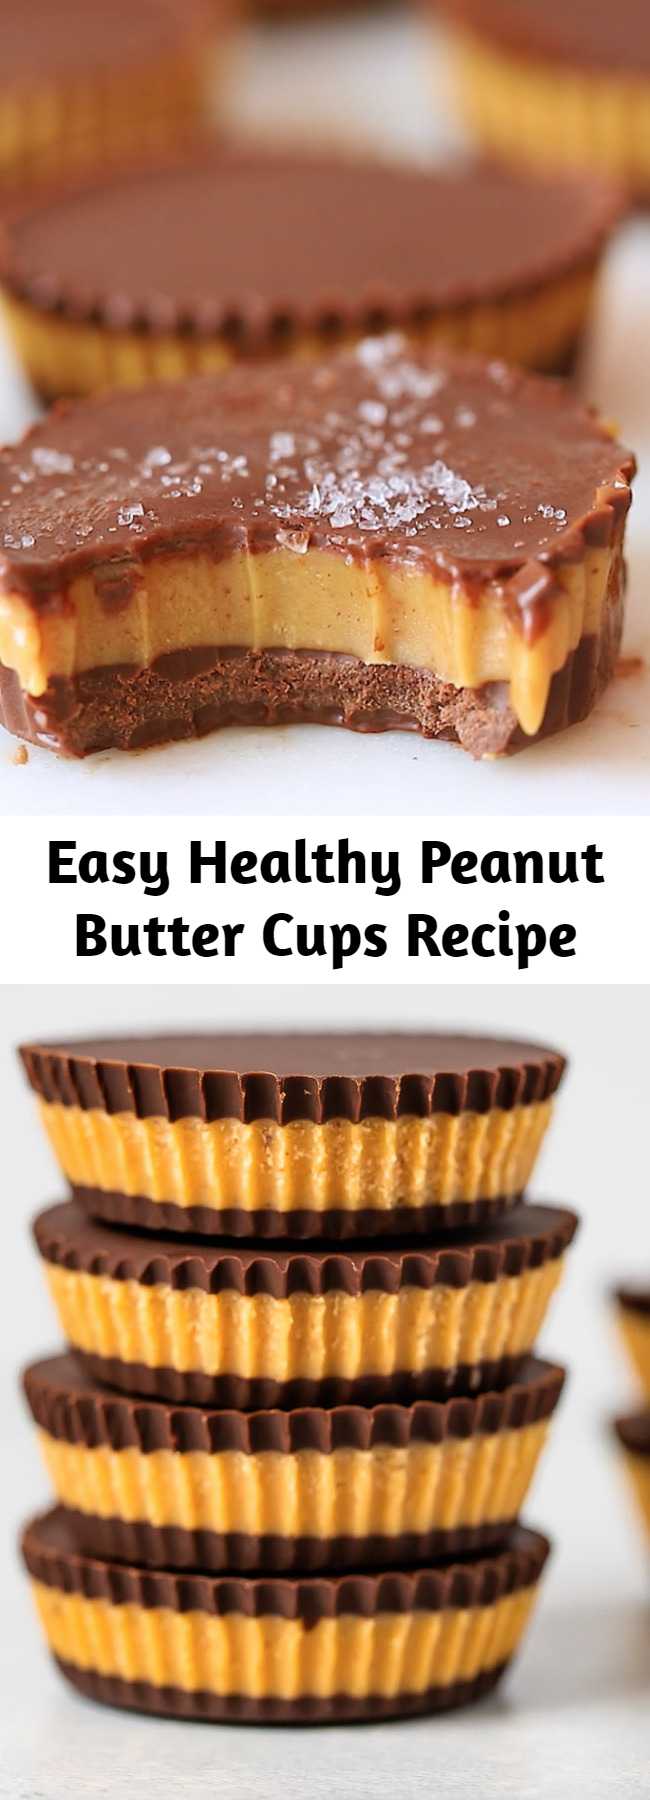 Easy Healthy Peanut Butter Cups Recipe - Make your own peanut butter cups using just 5 simple ingredients — dark chocolate chips, peanut butter, coconut oil, honey and sea salt.